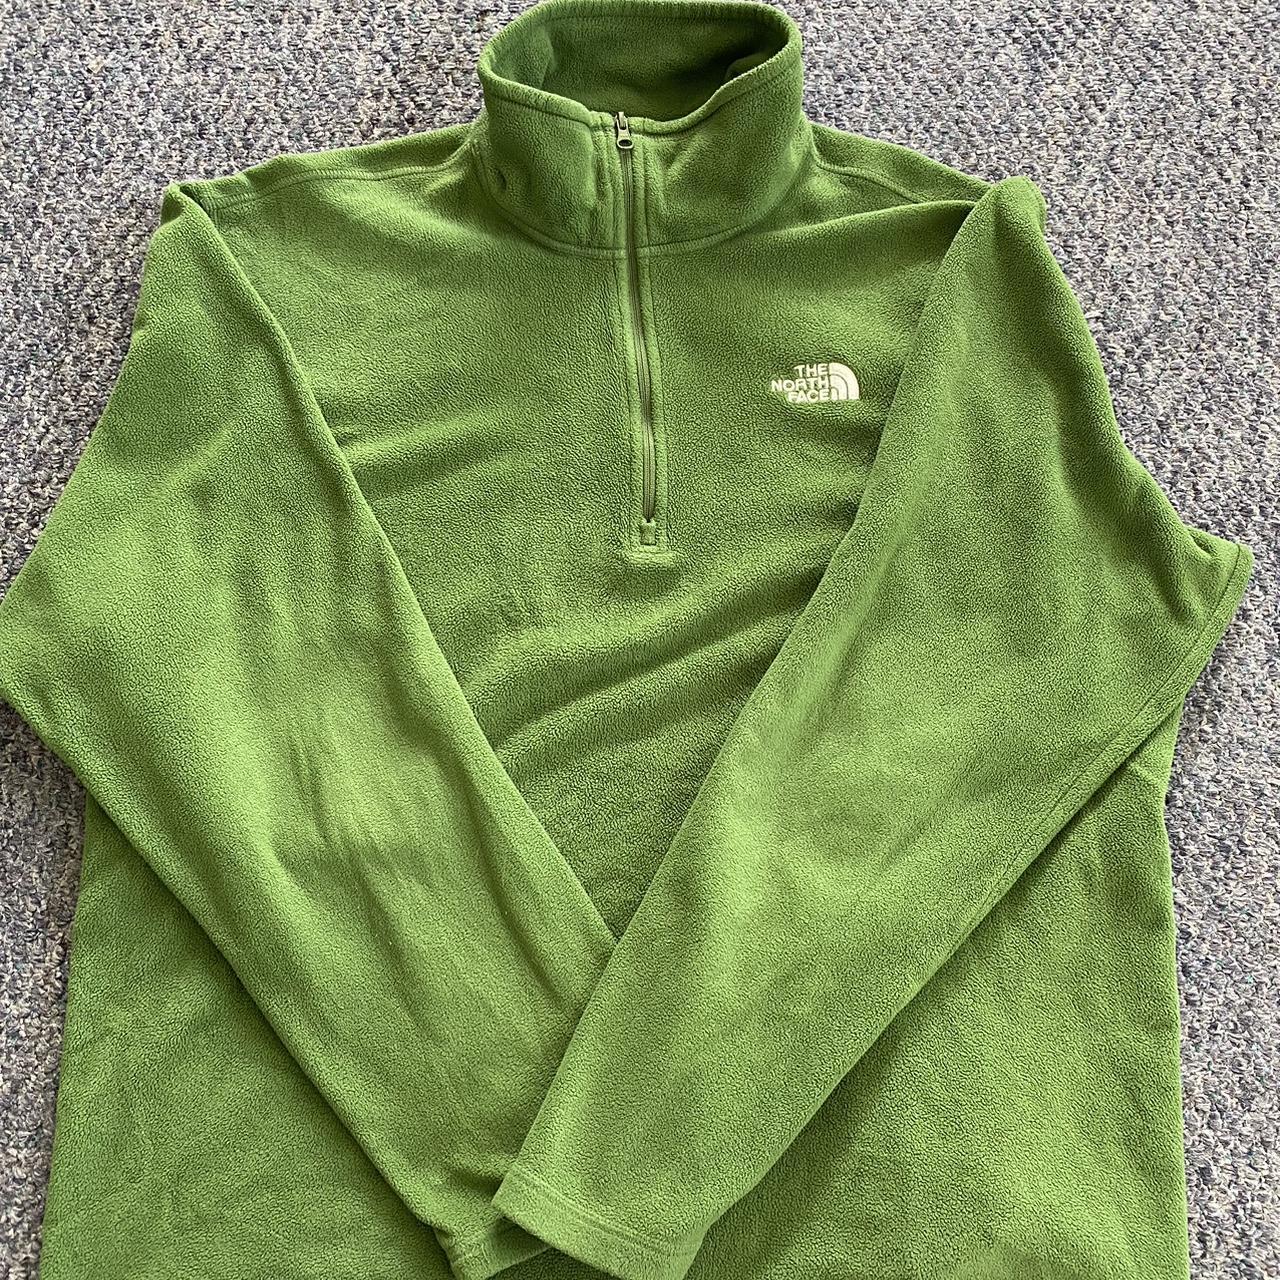 The North Face Men's Green Jacket